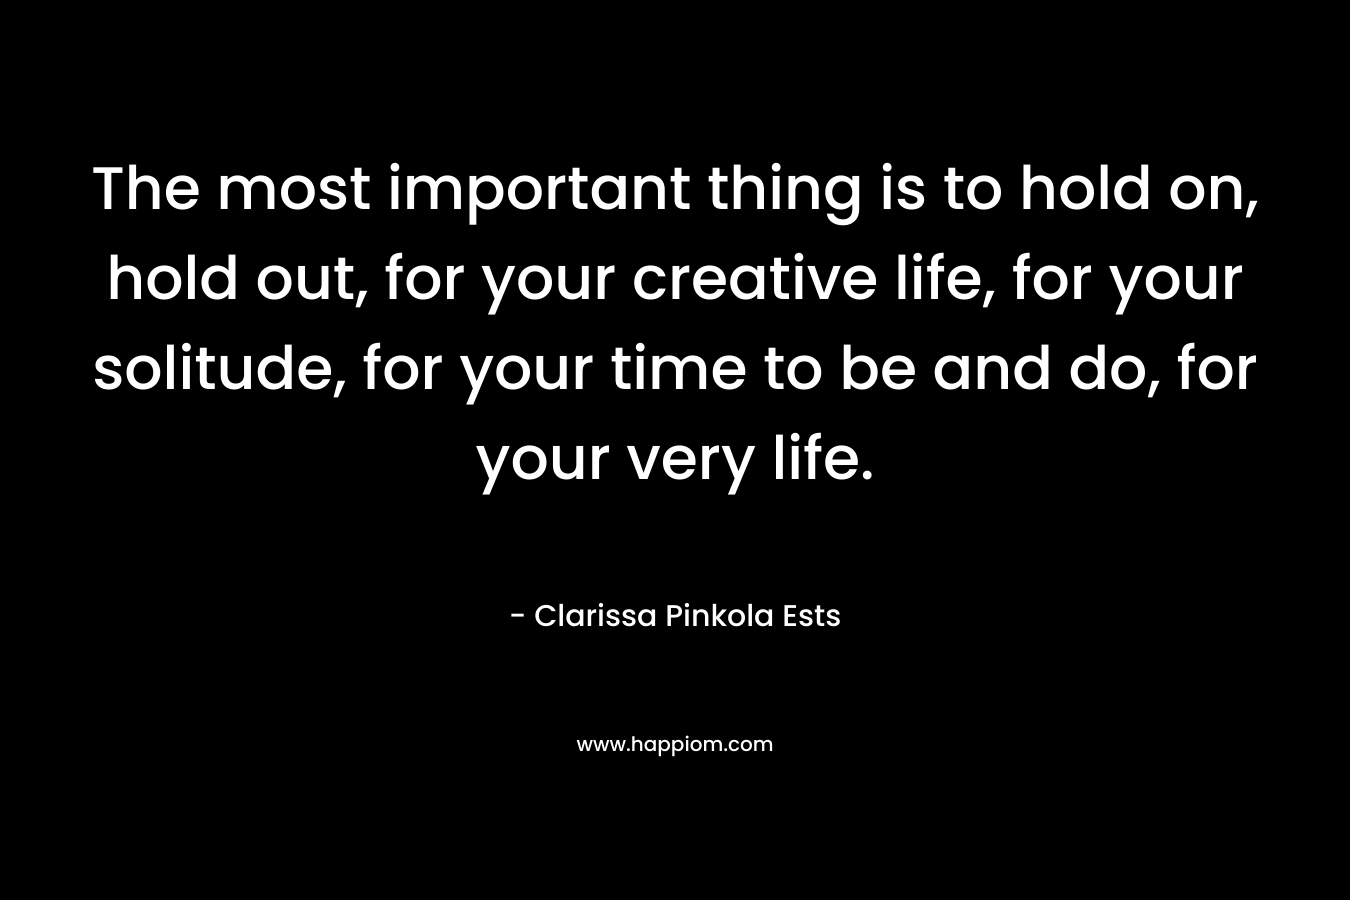 The most important thing is to hold on, hold out, for your creative life, for your solitude, for your time to be and do, for your very life. – Clarissa Pinkola Ests